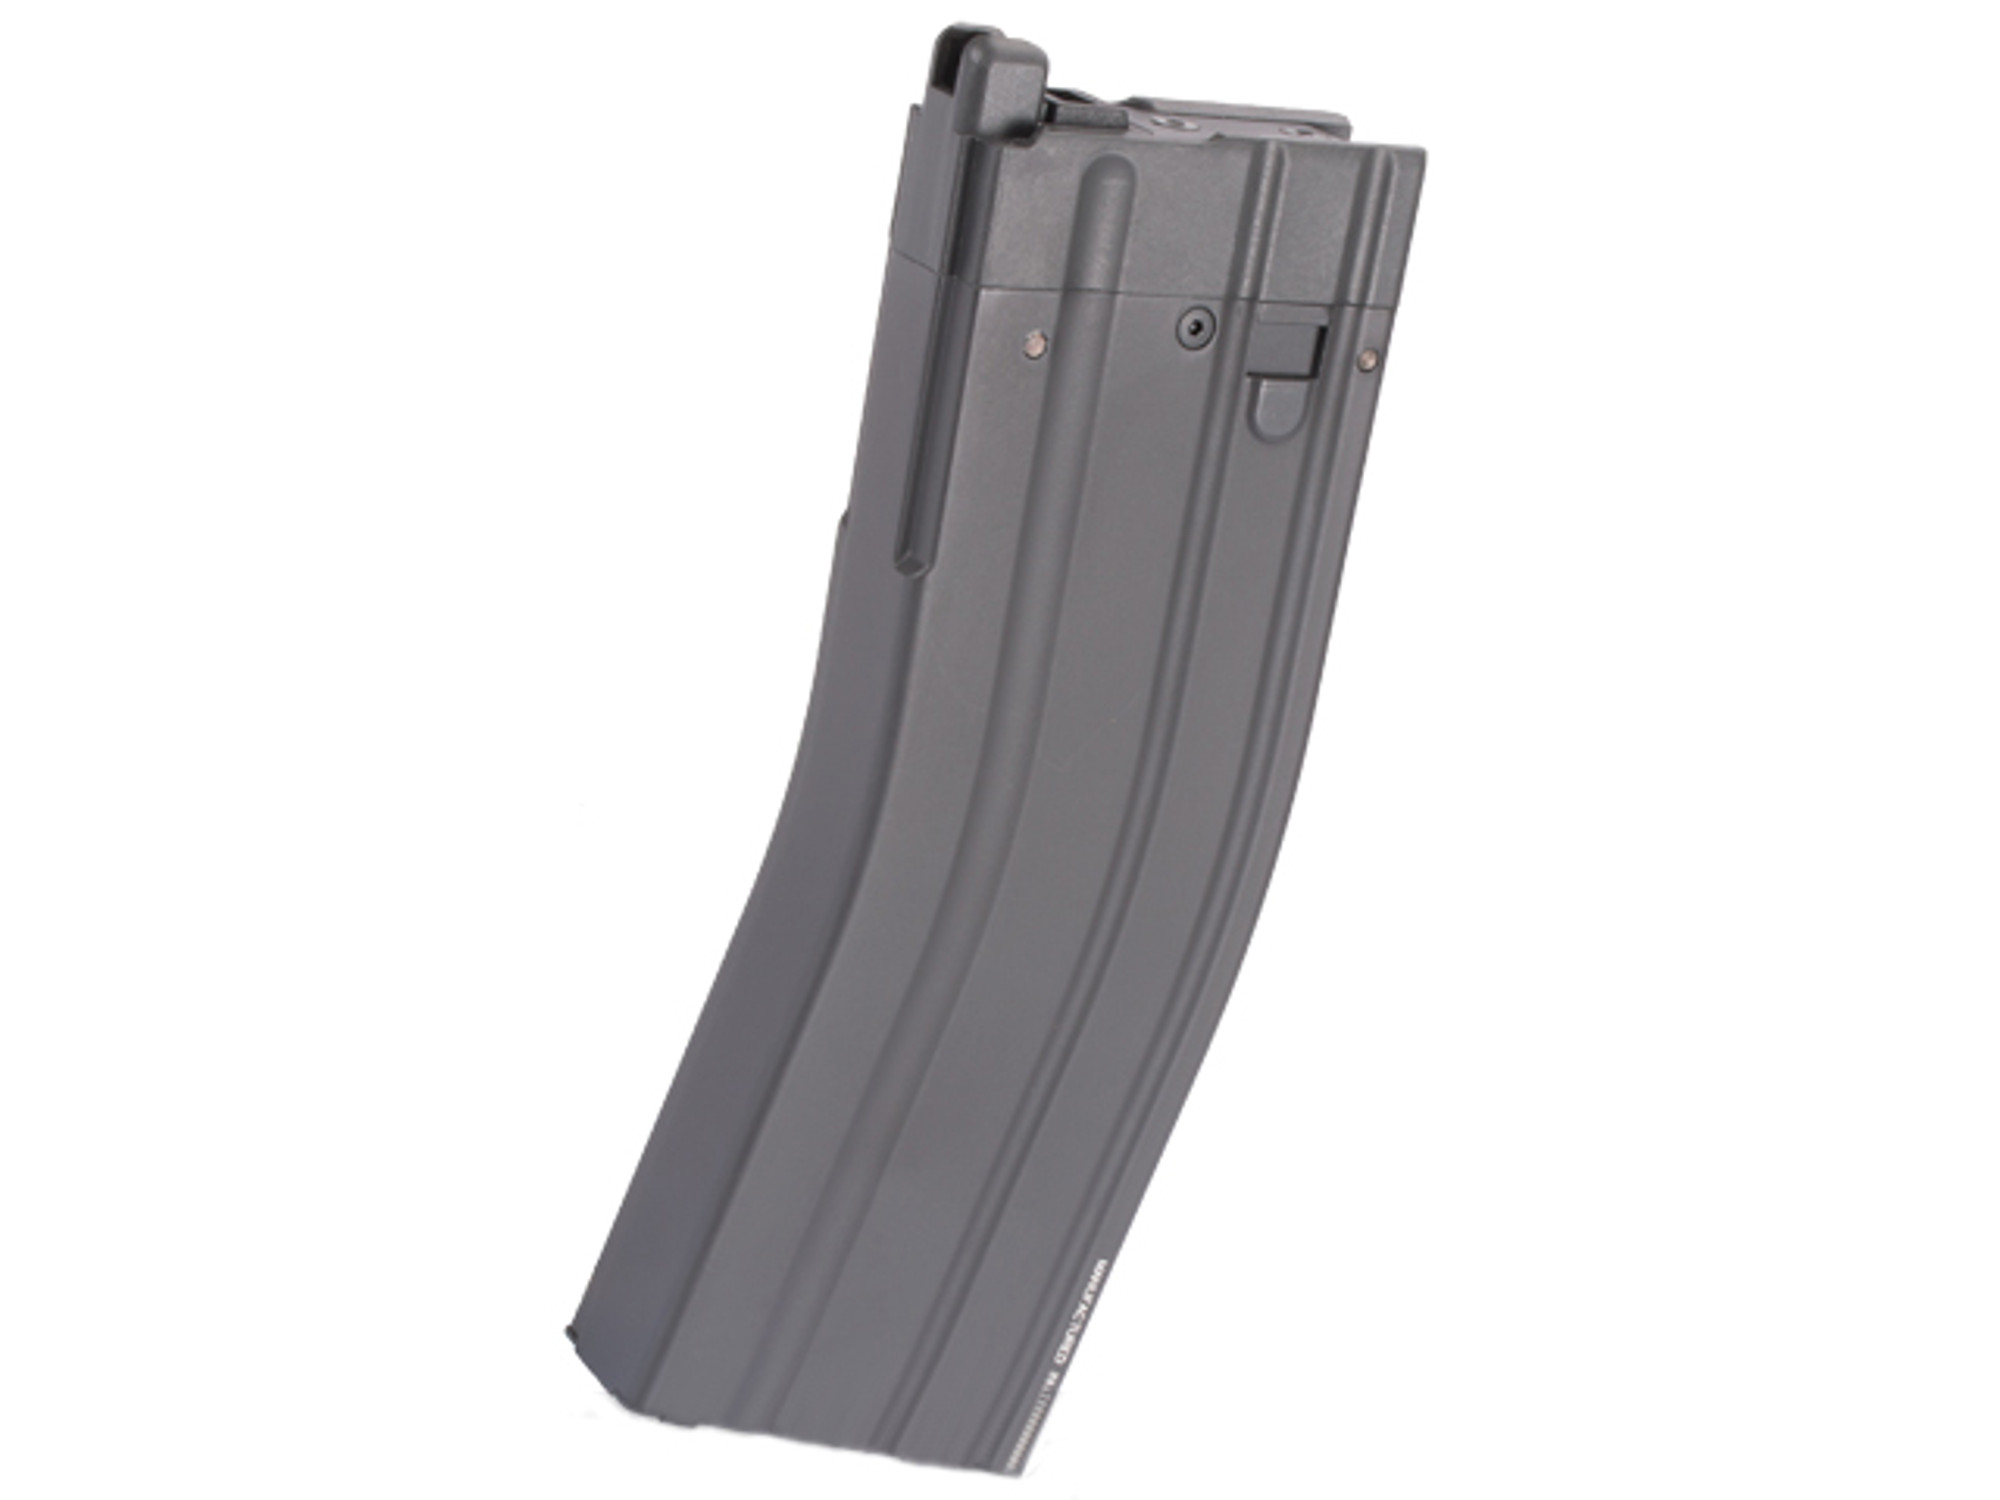 KWA Spare Magazine for KWA LM4 M4 Airsoft Gas Blowback GBB Series Rifles